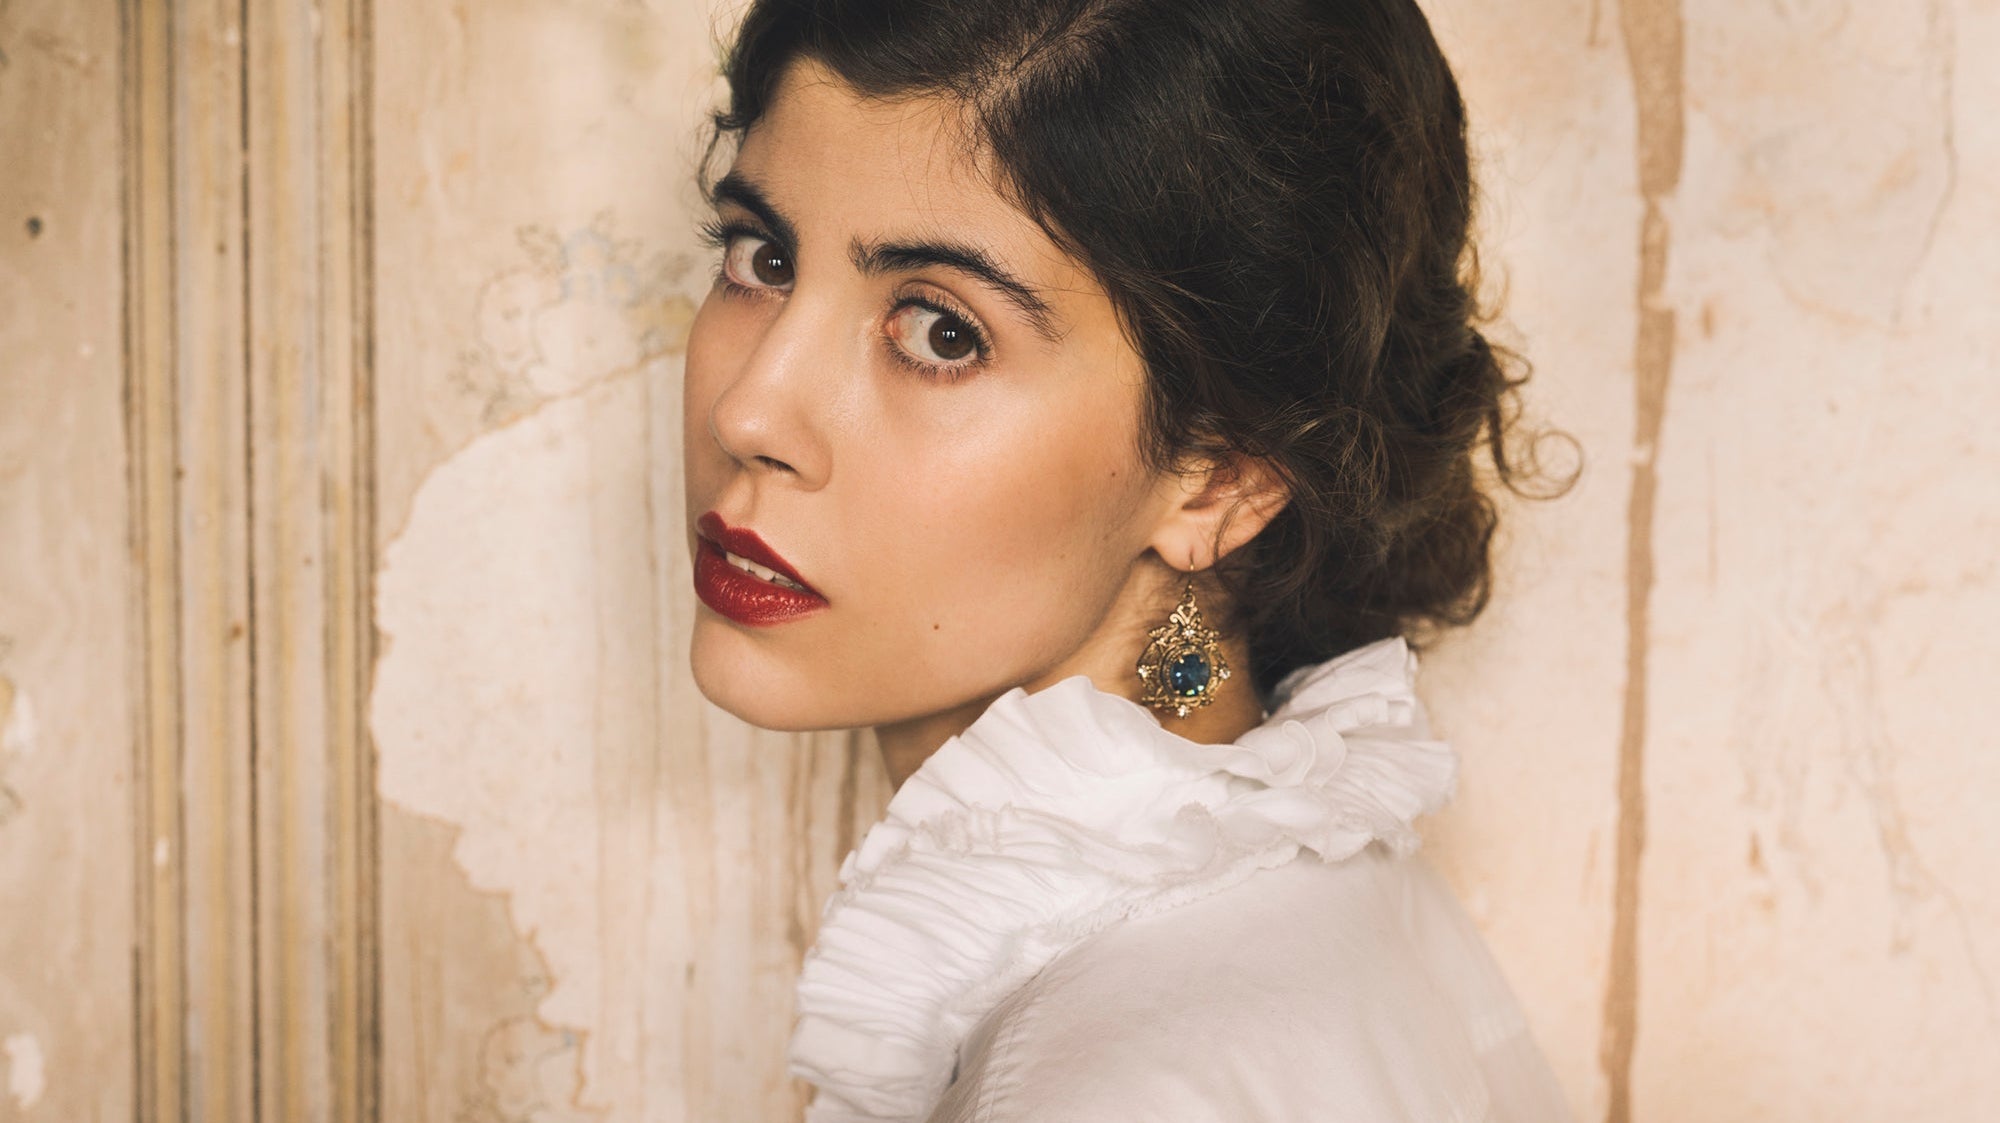 A powerful image of a white Frenchwoman wearing an antique white collared shirt against an antique mural. She looks directly at the camera with deep brown eyes, a regal blue-stoned earring hanging below her lobe.